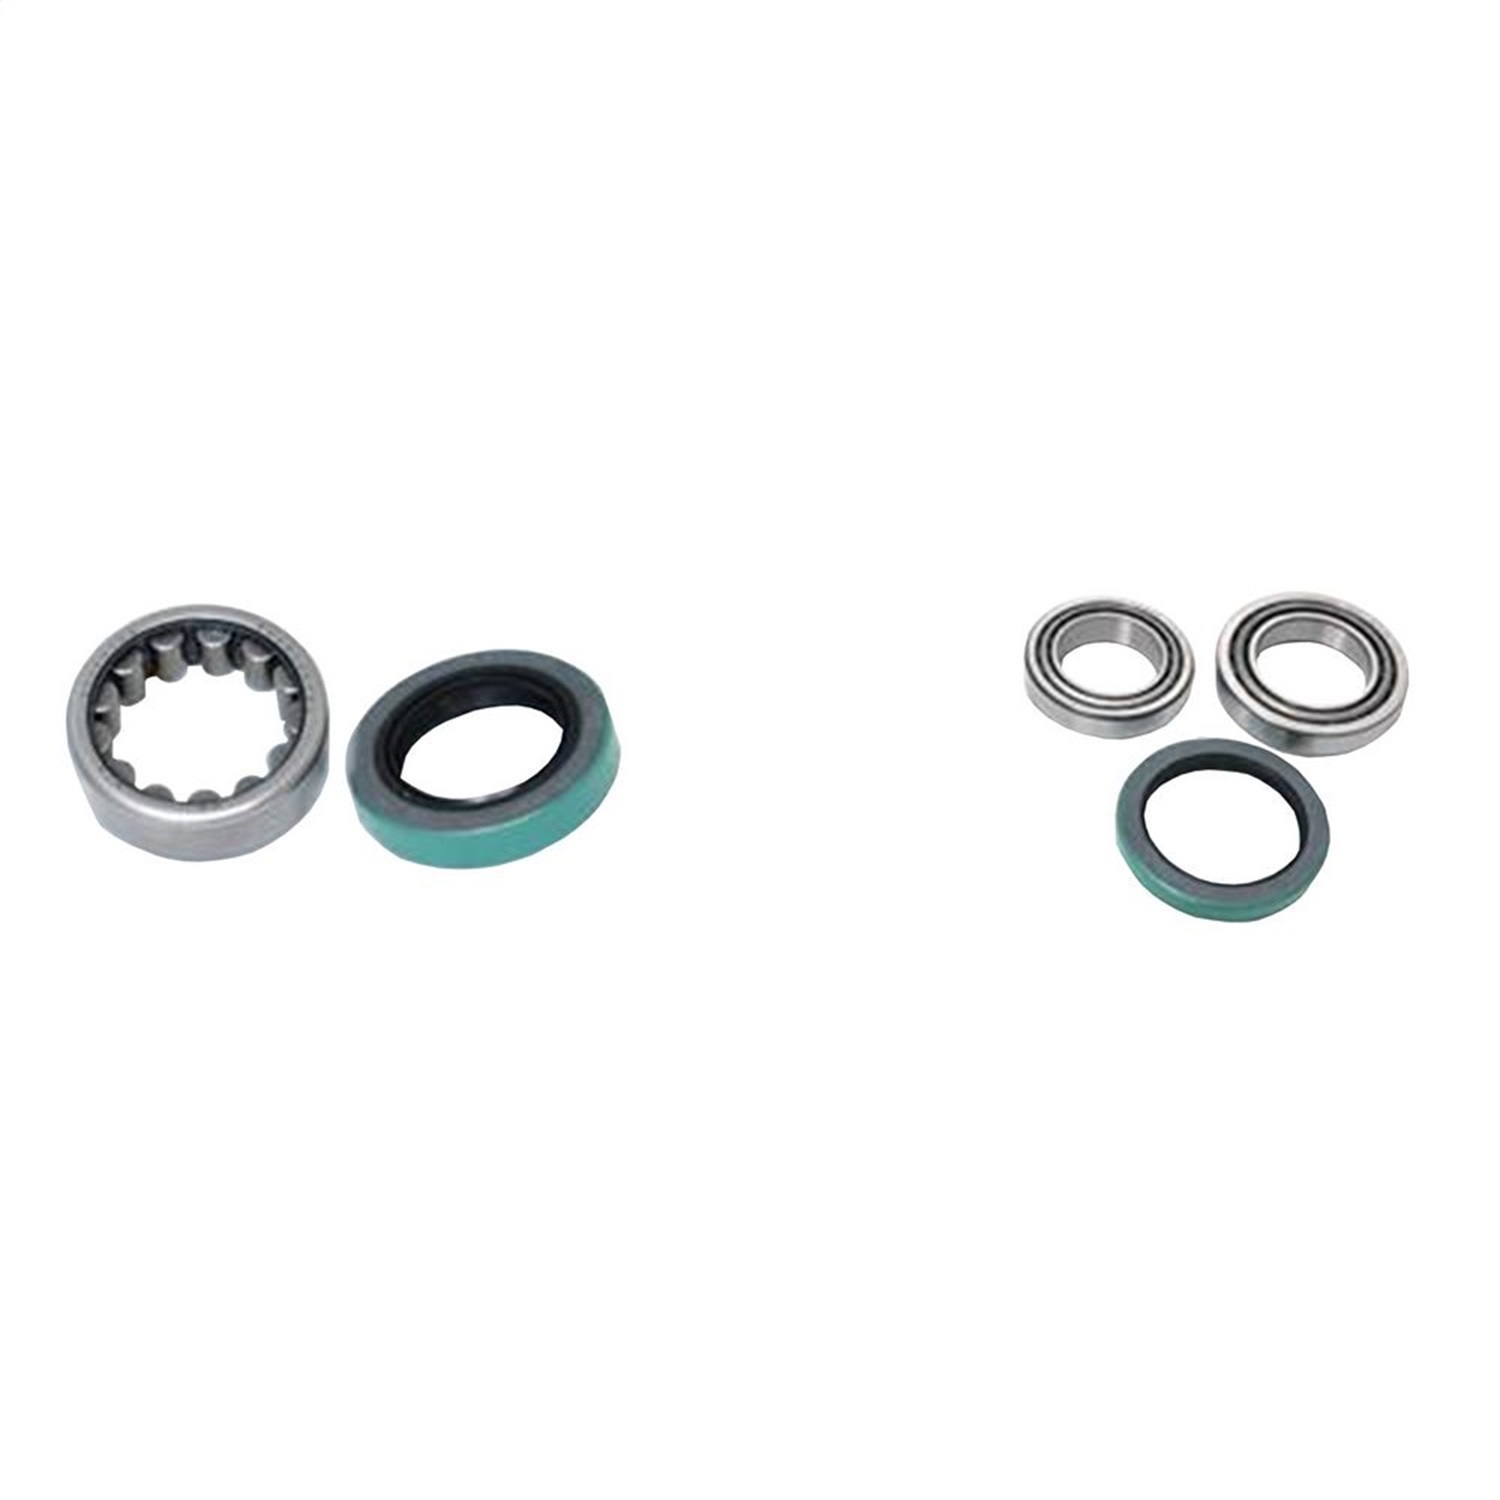 G2 Axle and Gear G2 Axle and Gear 30-9008 Wheel Bearing Kit